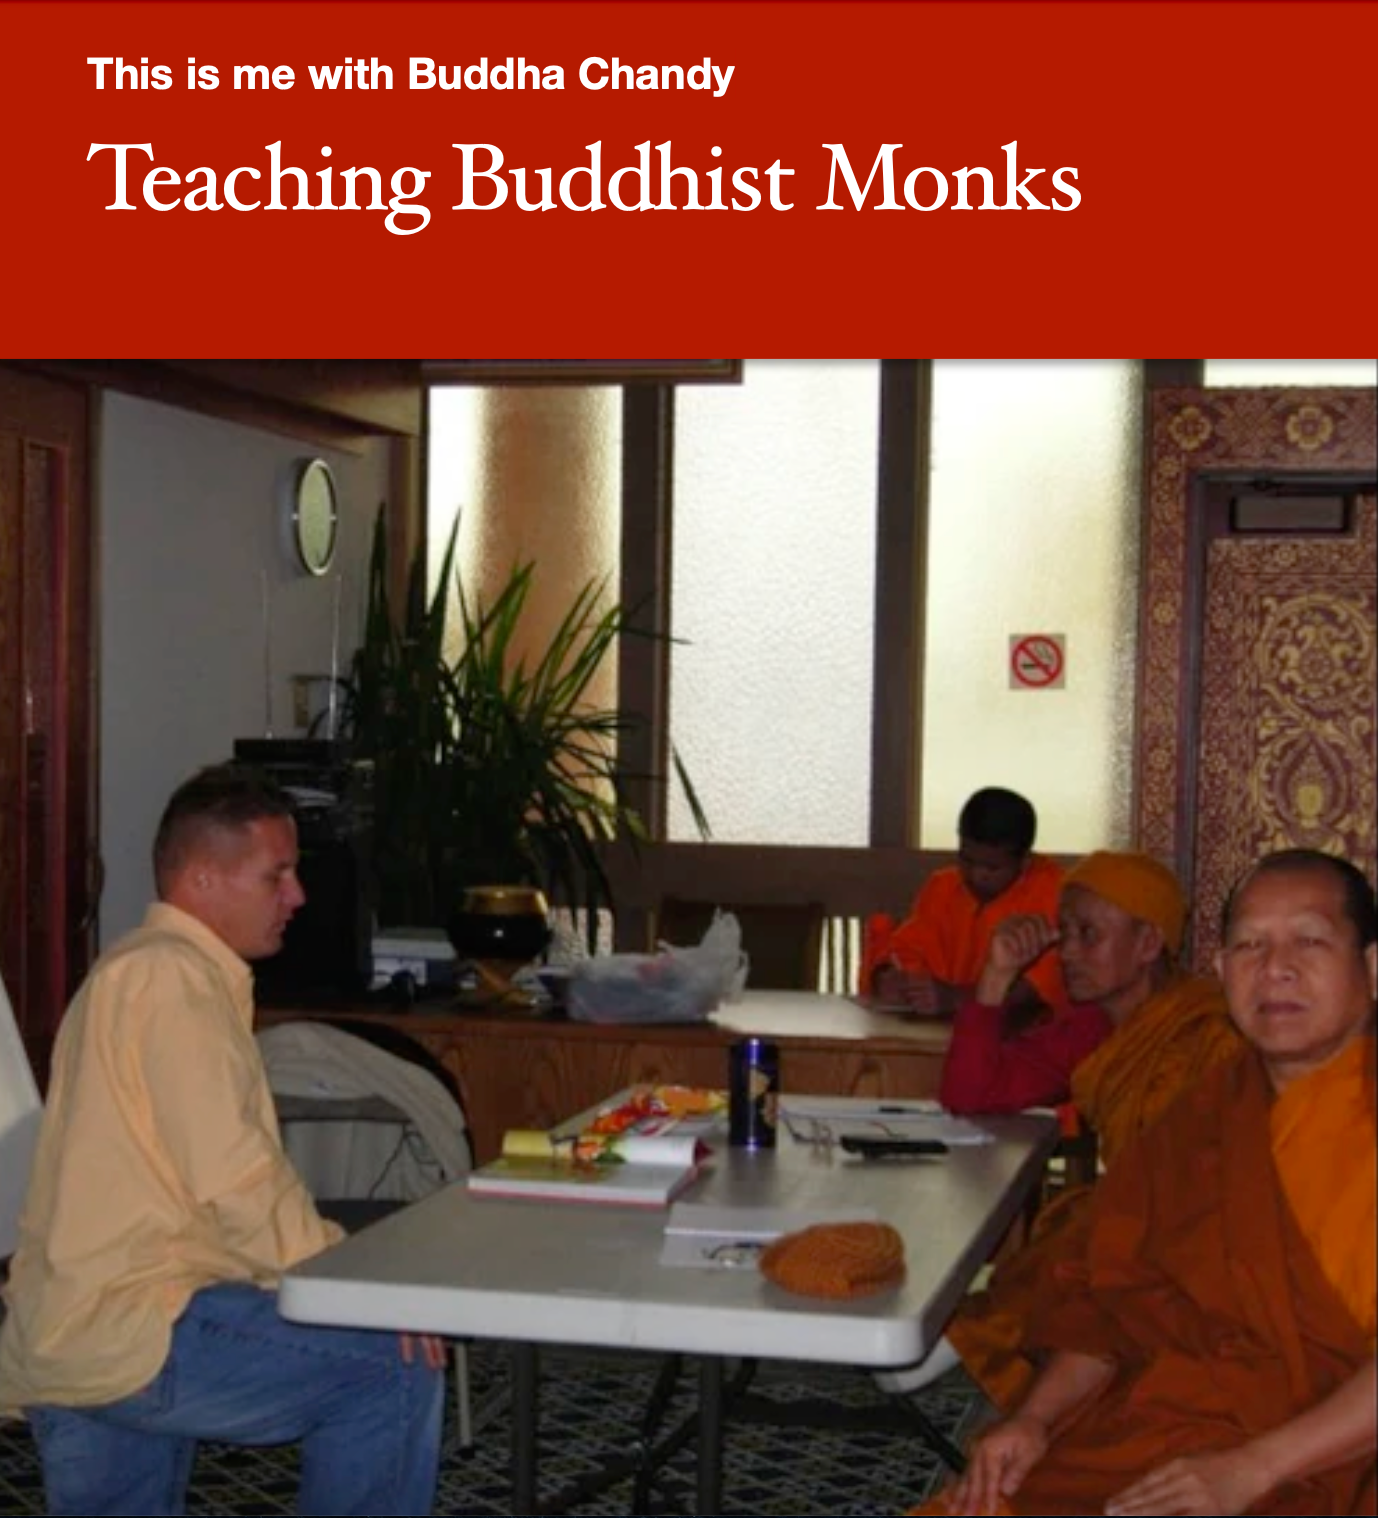 Elite Dating Tips and Relationship Coaching | This is me wearing a Yellow Dress Shirt Kneeling in Buddhist Temple Teaching Buddhist Monks Communication Skills | Buddha Chandy was my mentor and Teacher for Years